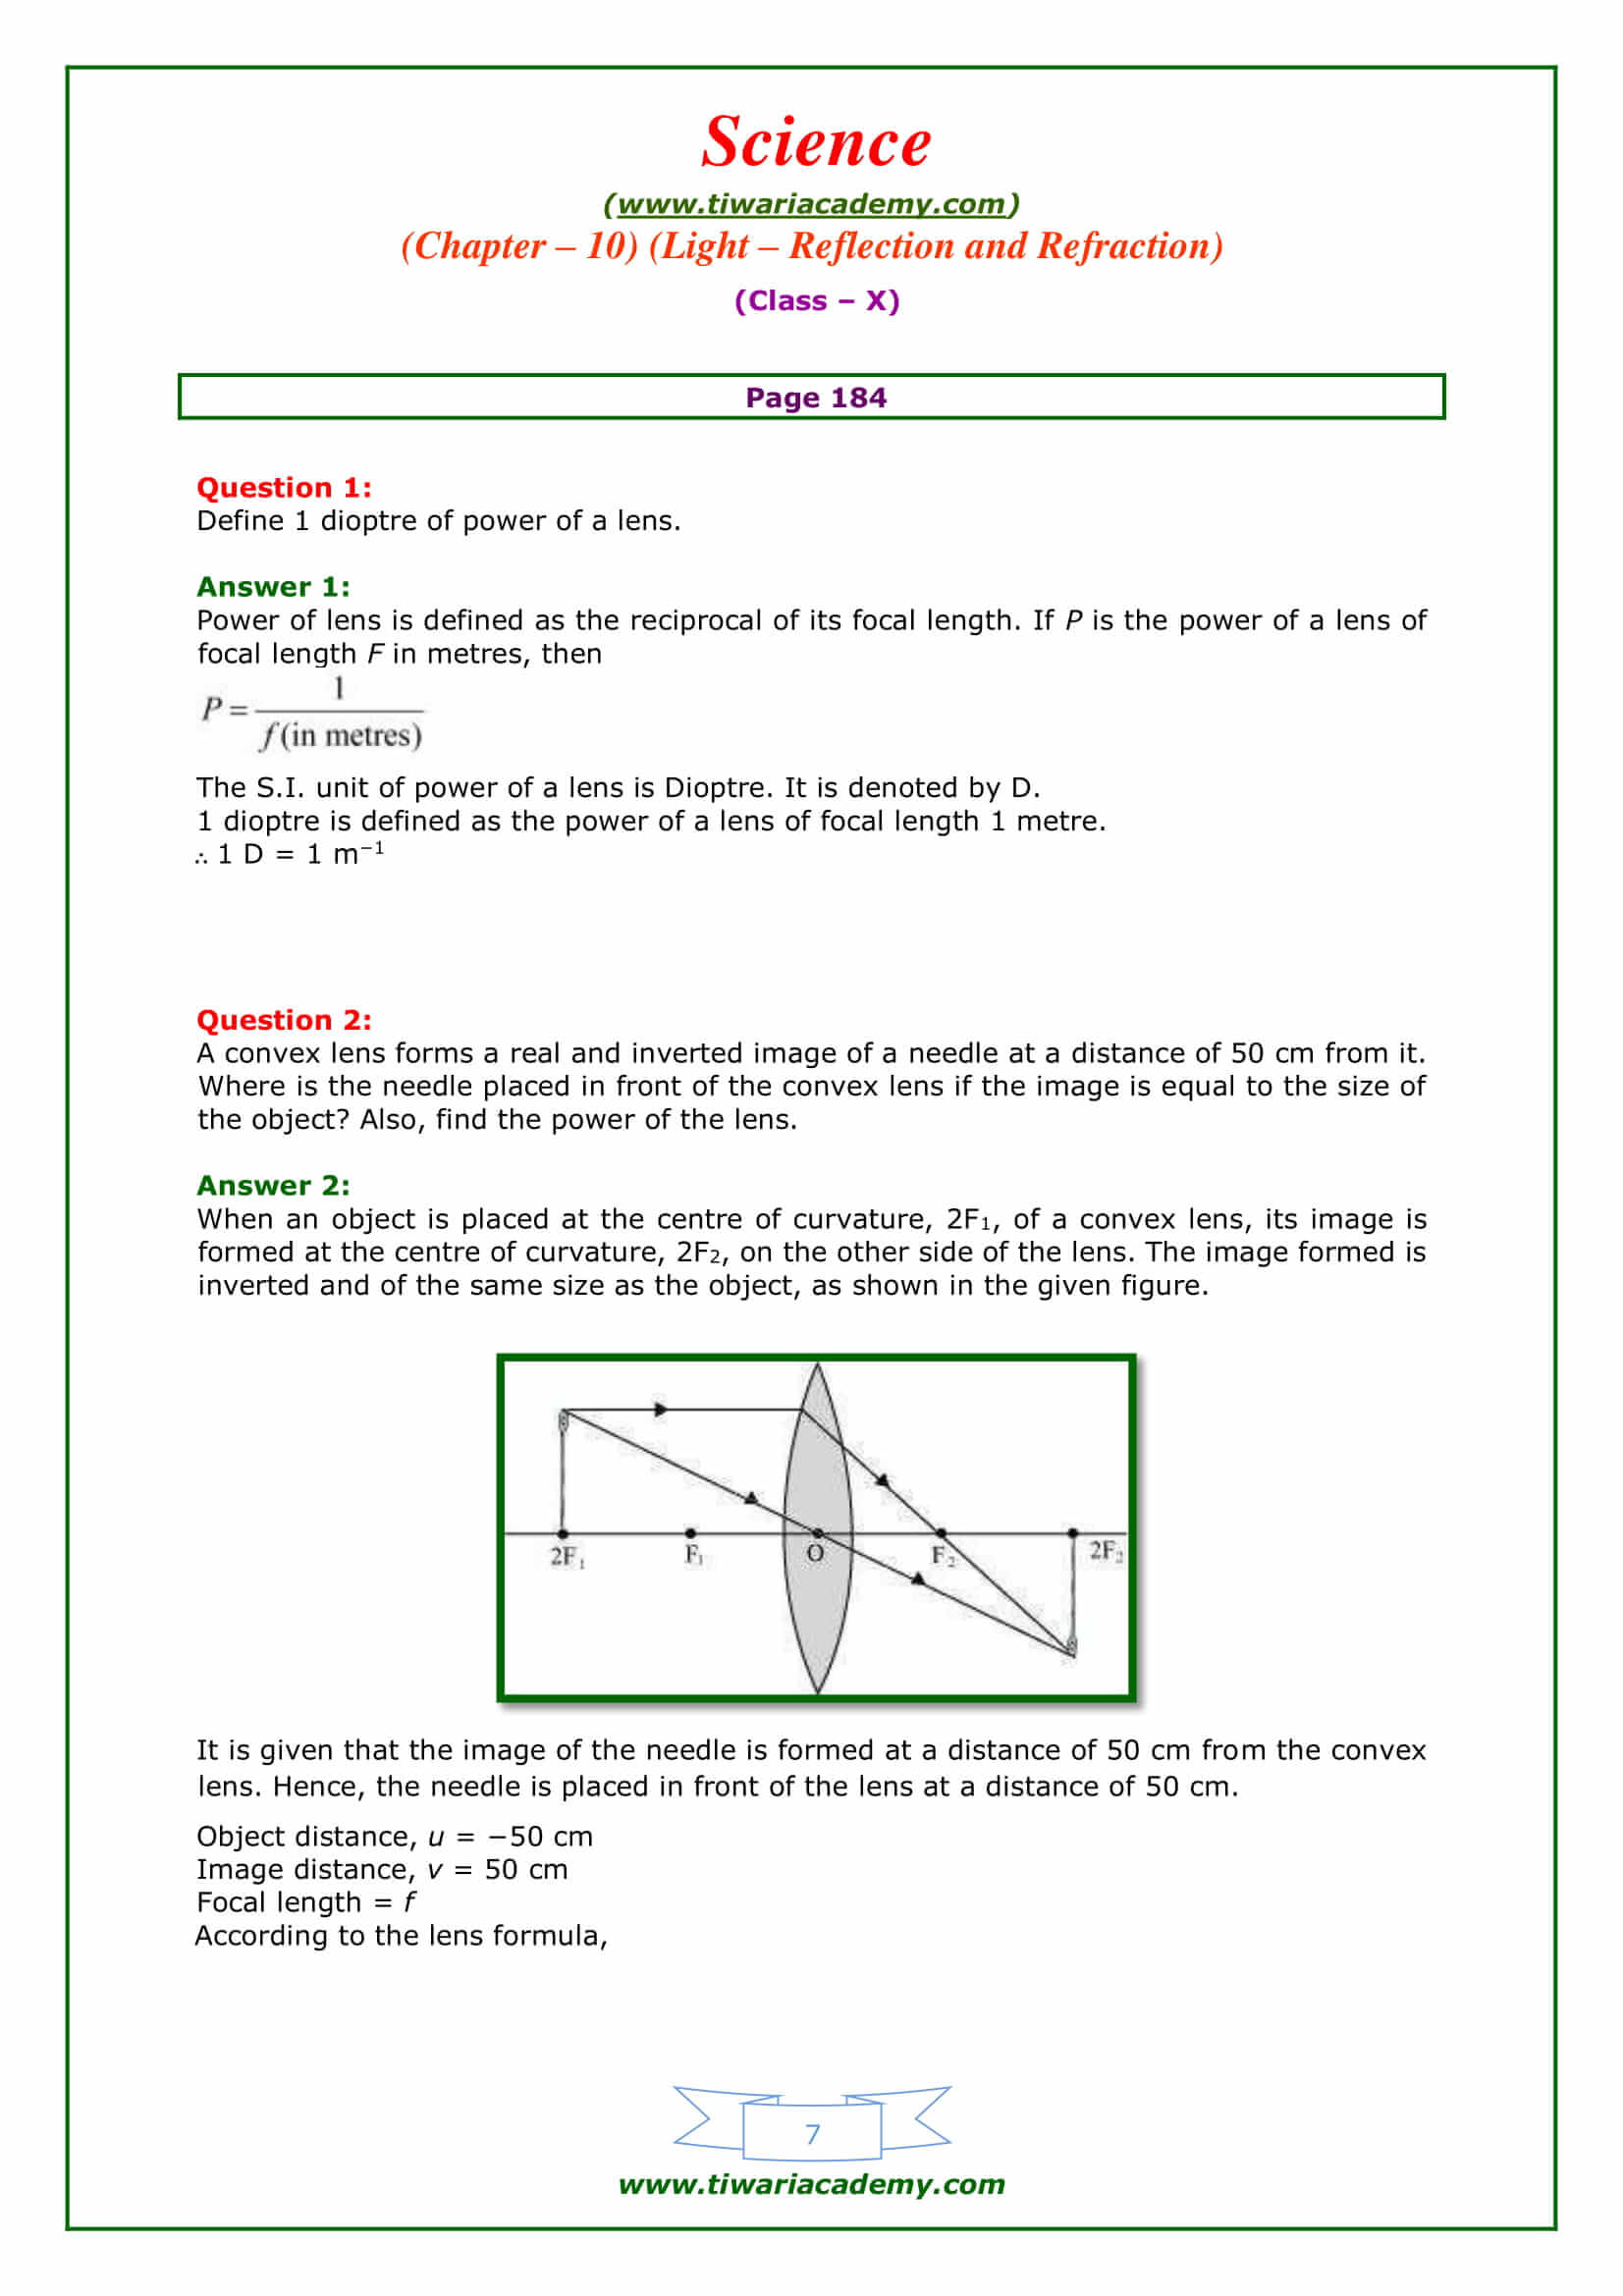 Solutions for Class 10 Science Chapter 10 Light – Reflection and Refraction Intext questions on page 184